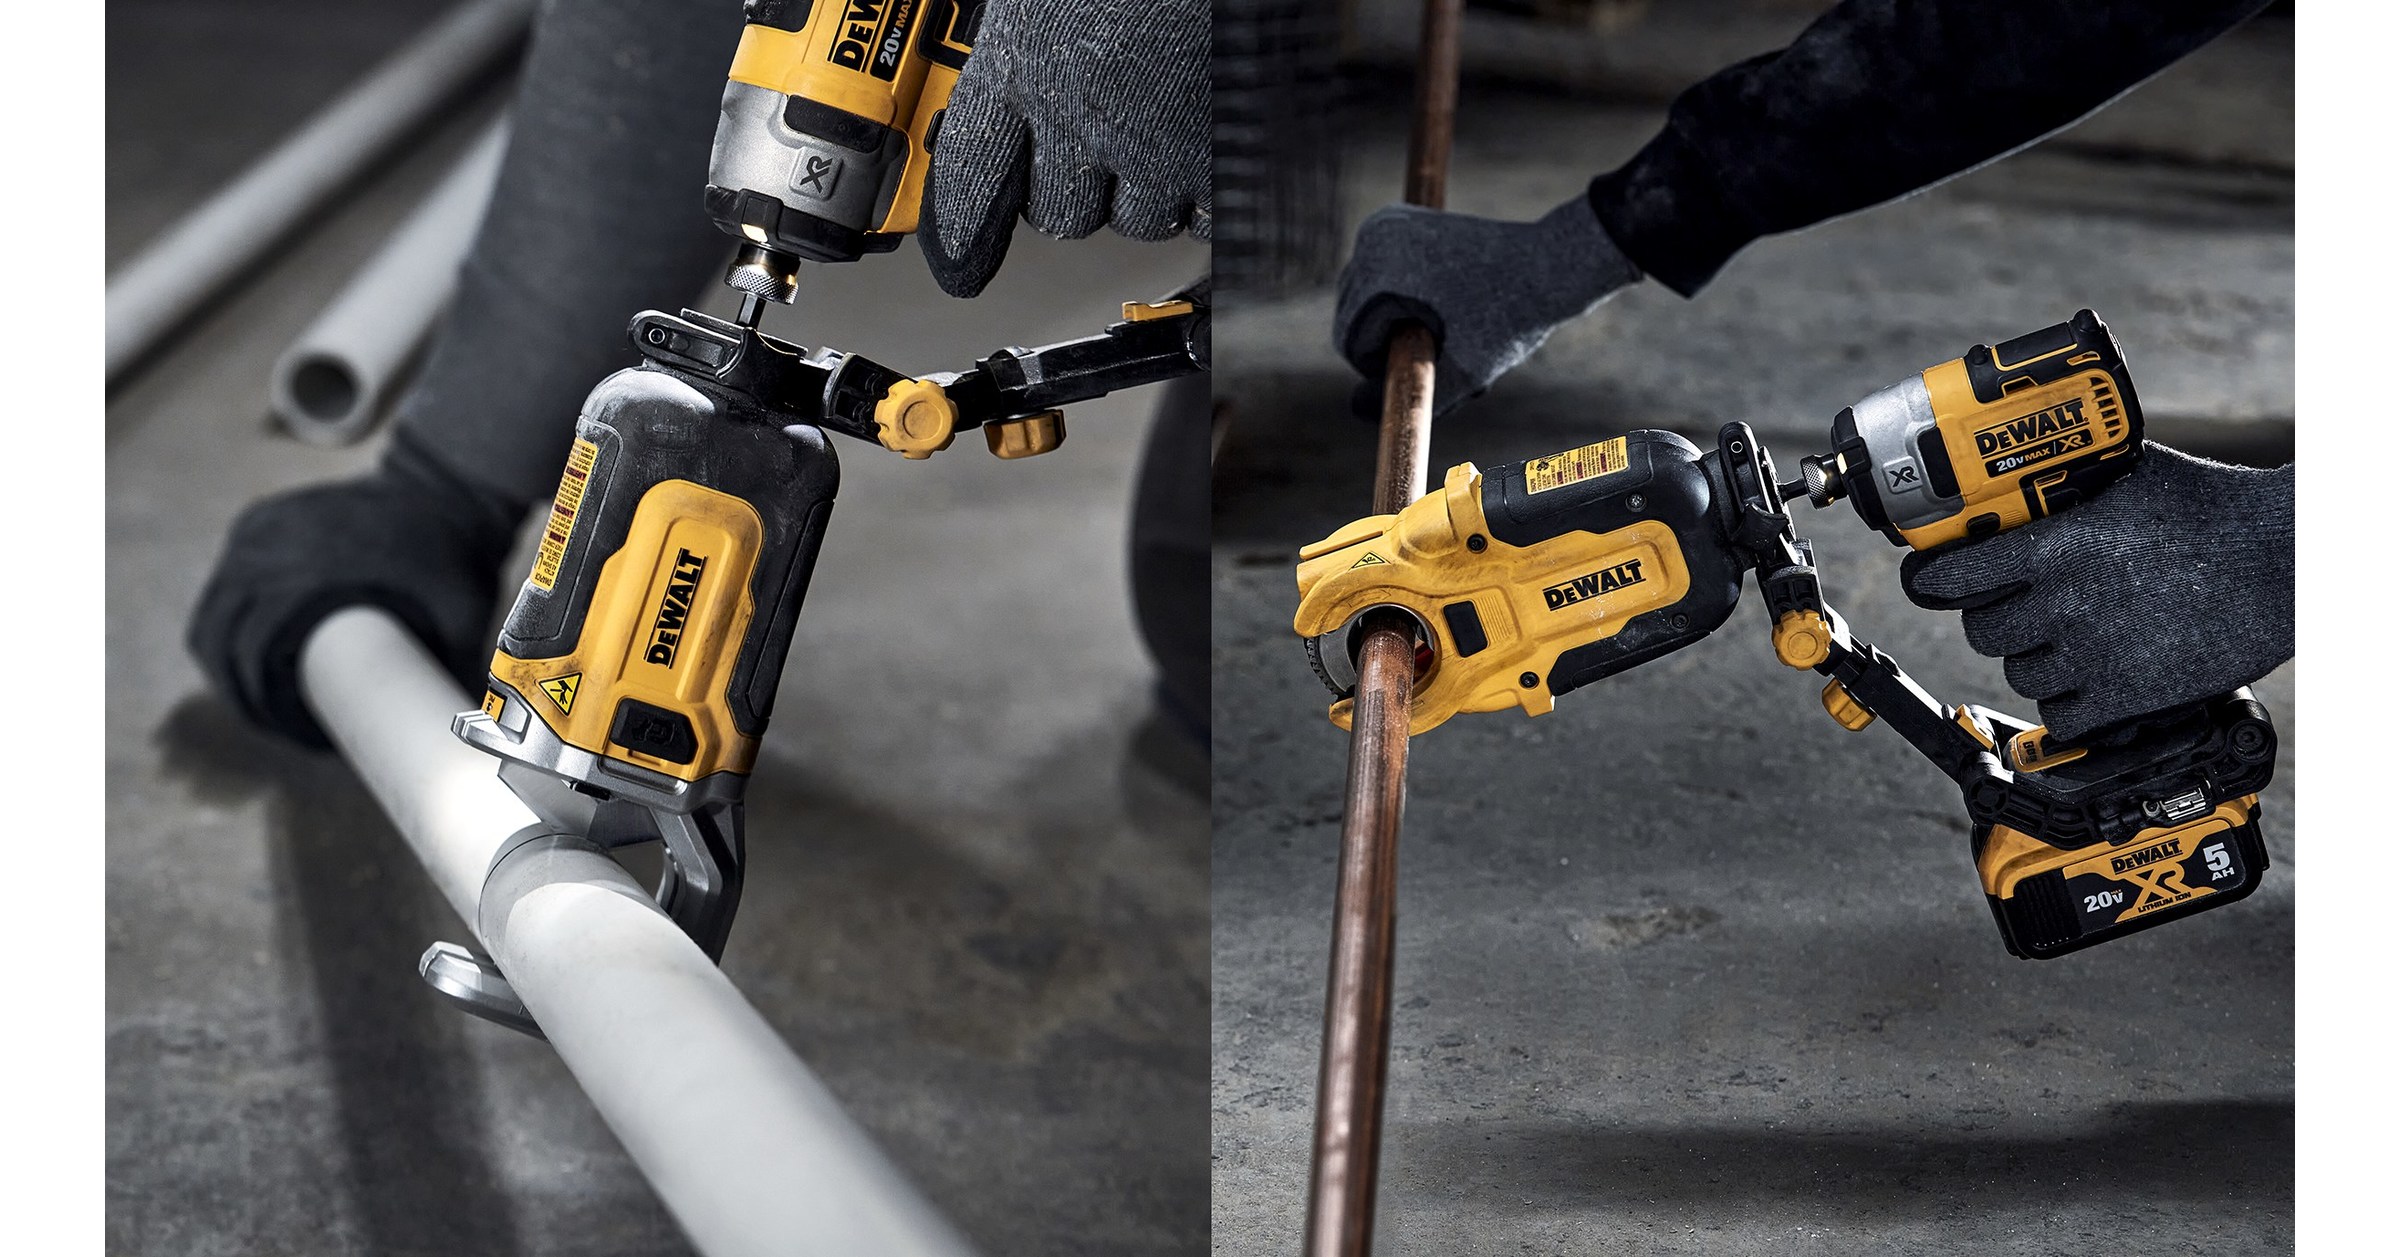 Transforming the DEWALT® Introduces the IMPACT CONNECT™ System; A Revolutionary New Line of Attachments to Perform Jobs with Less Effort